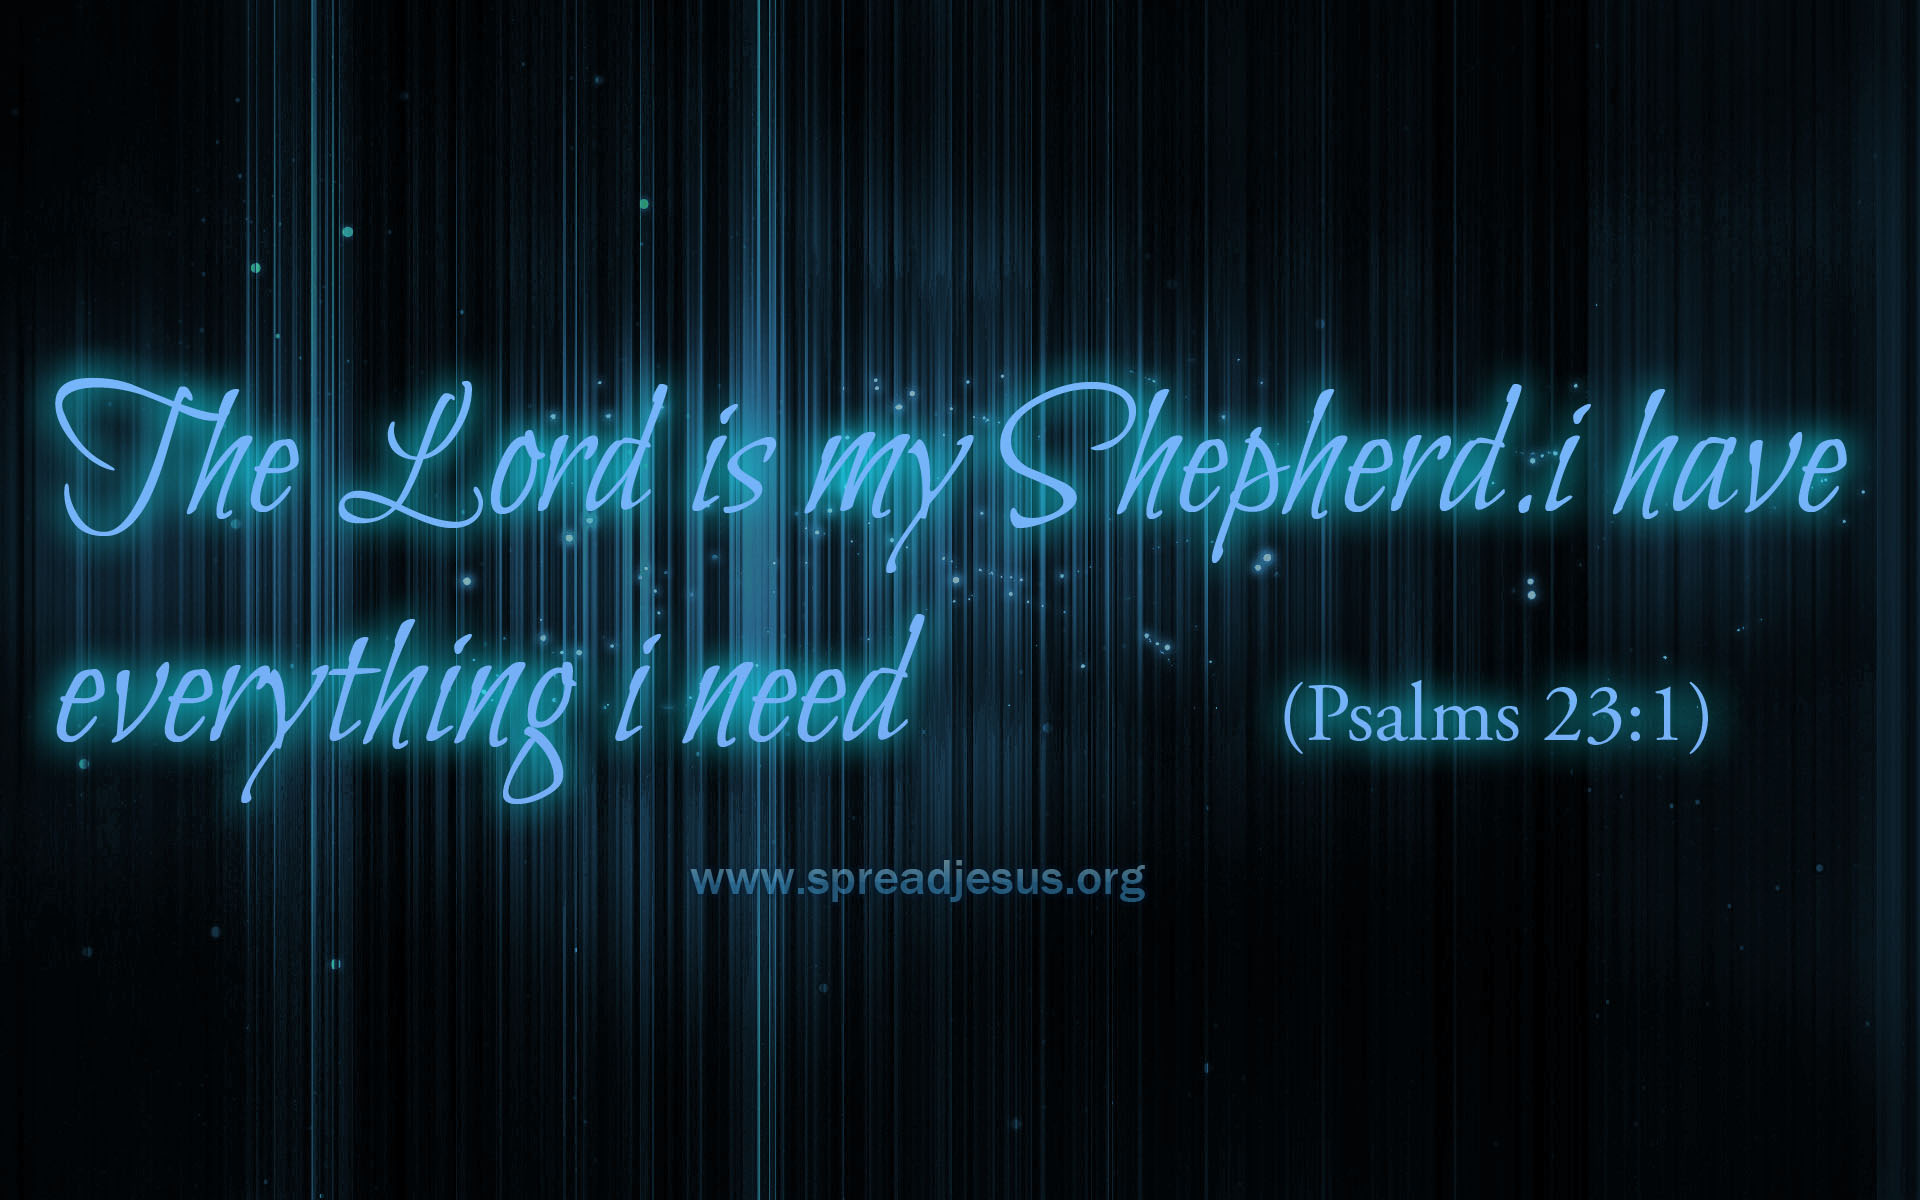 Inspirational Bible Quotes HD Wallpapers Free Download Psalms 23:1 